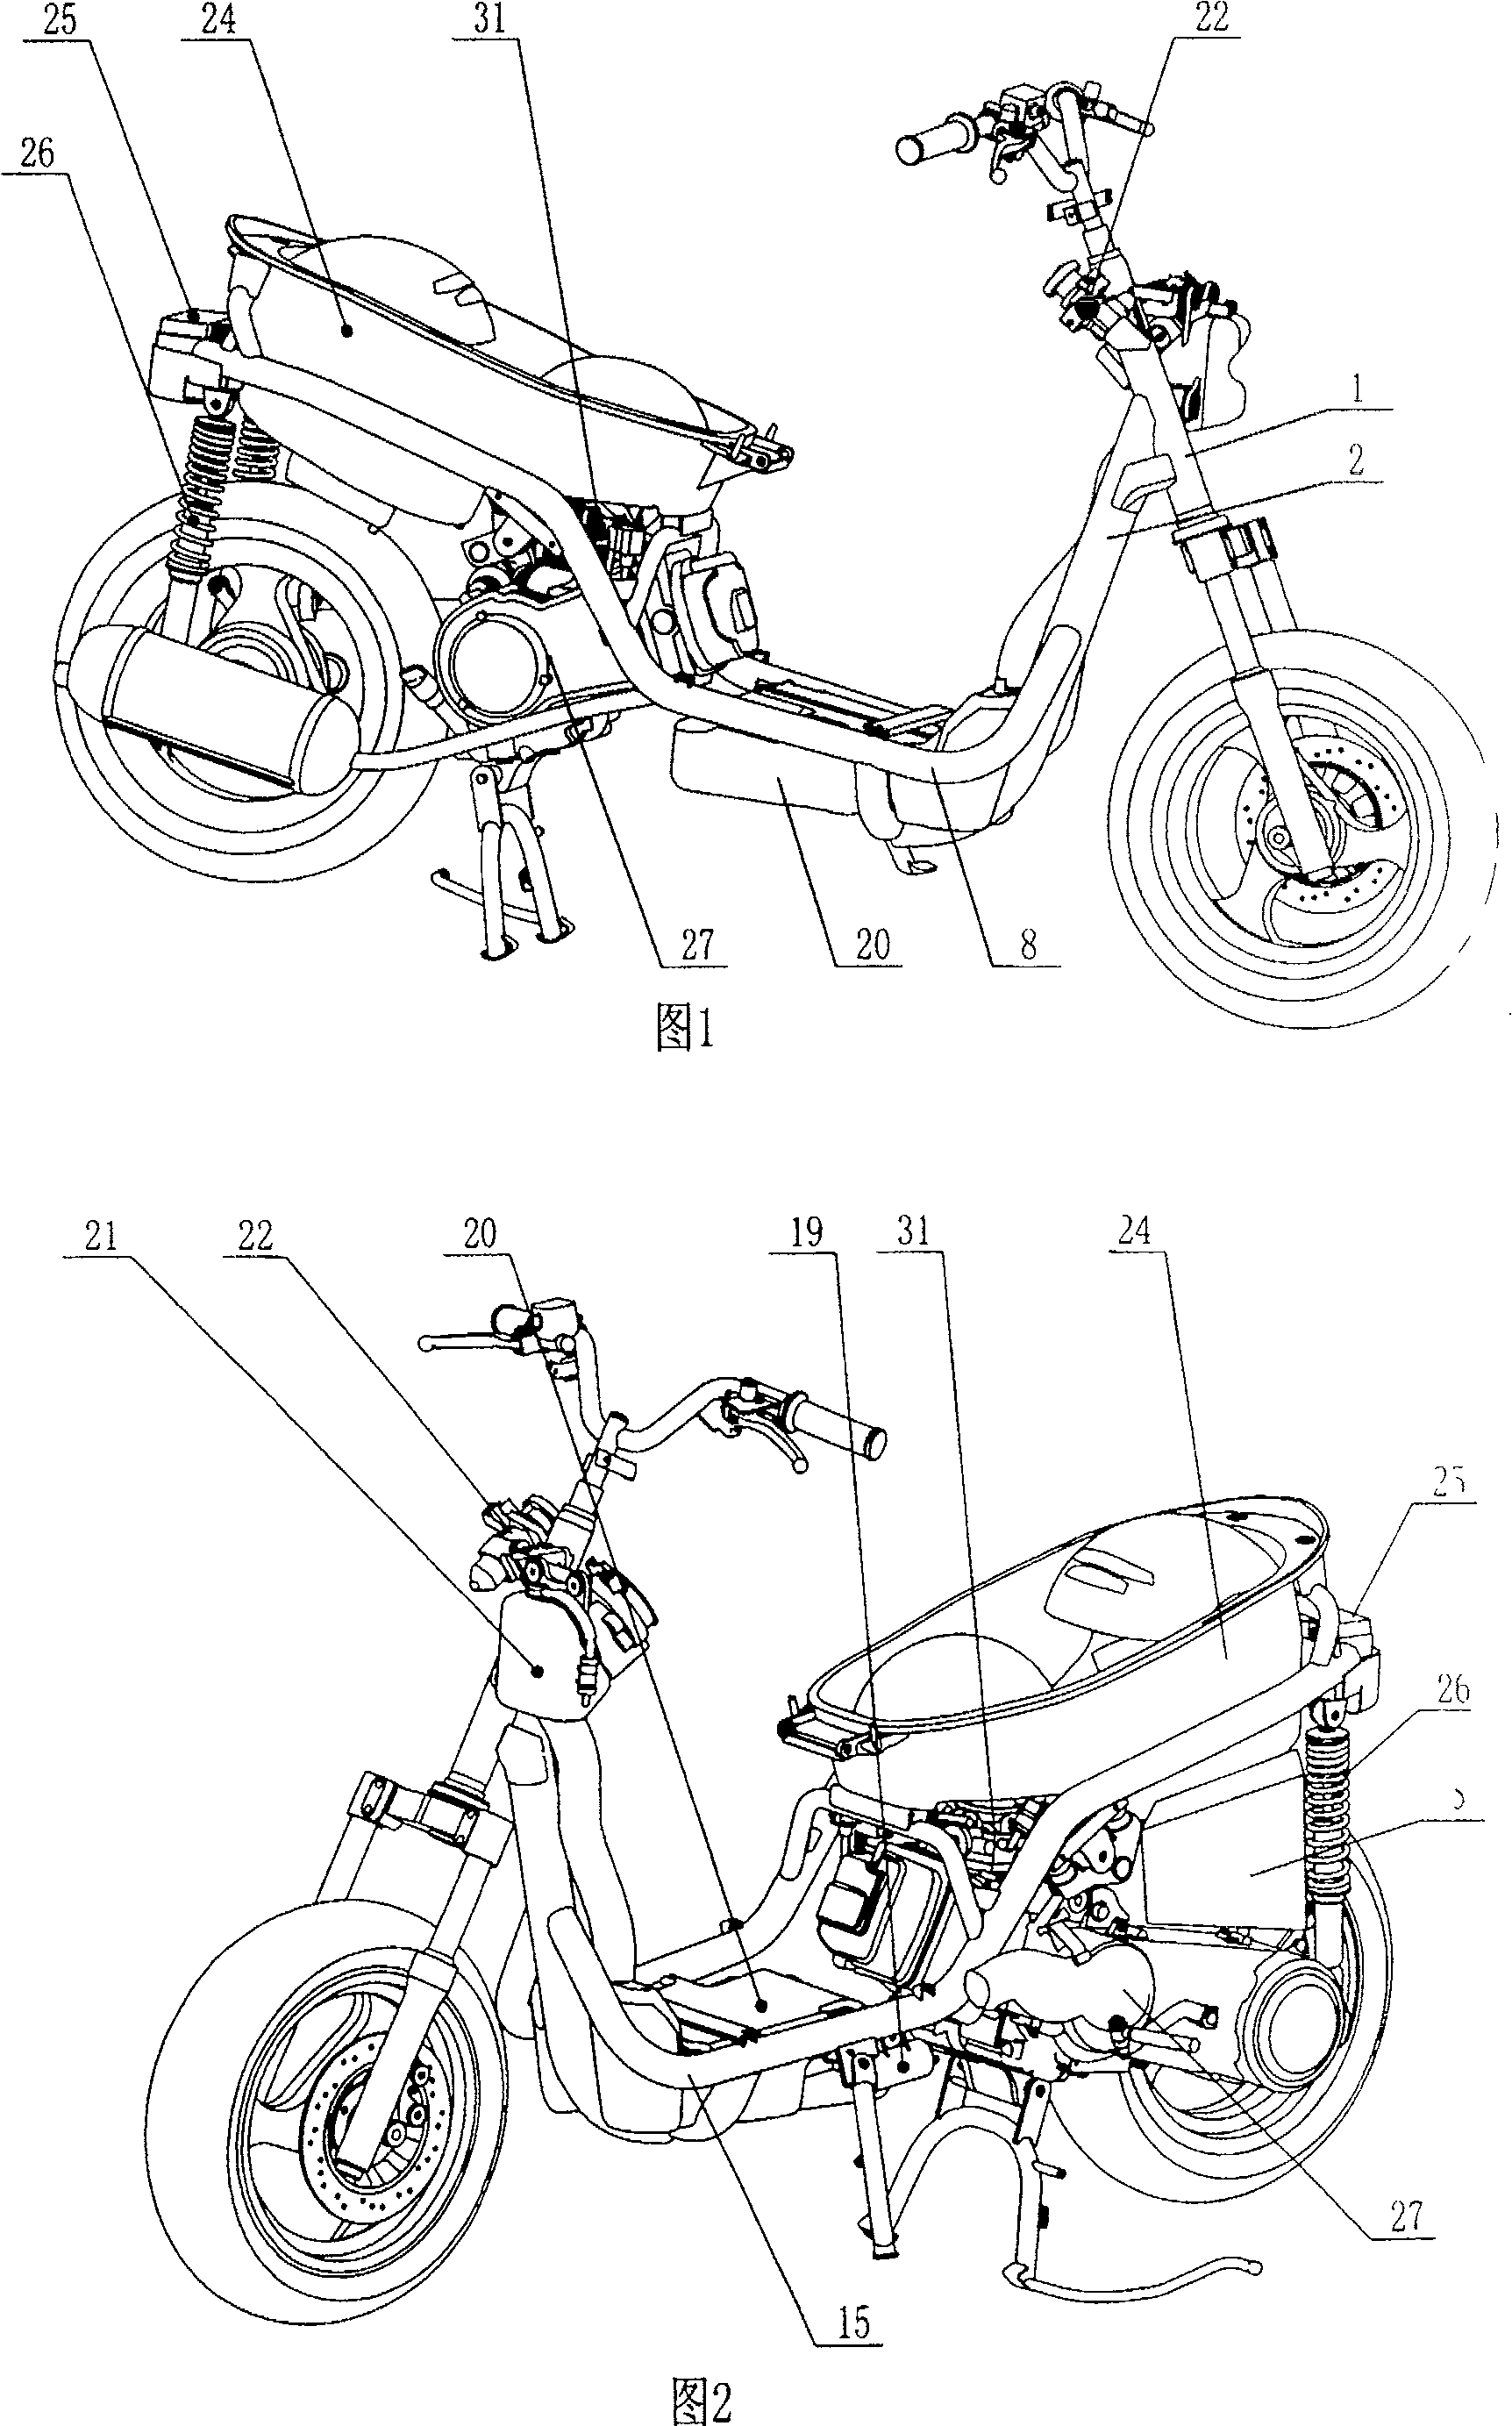 Pedal type motorcycle